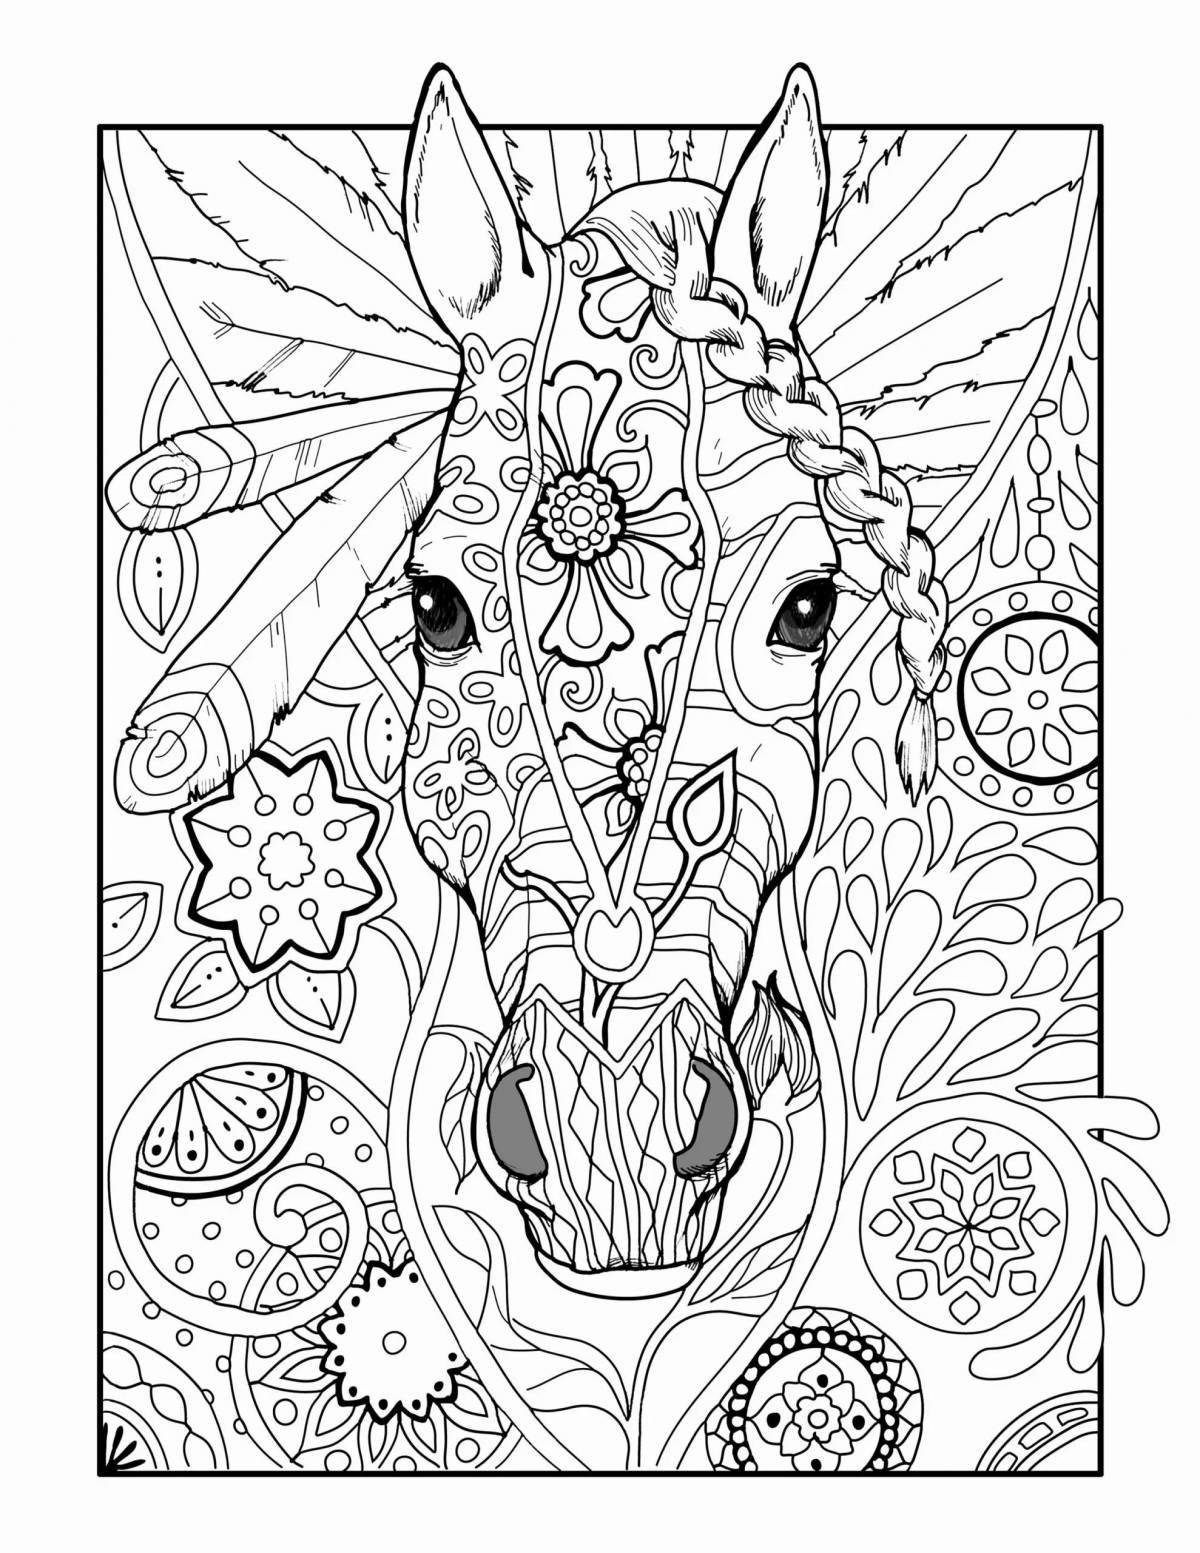 A fun coloring book to relax the nervous system